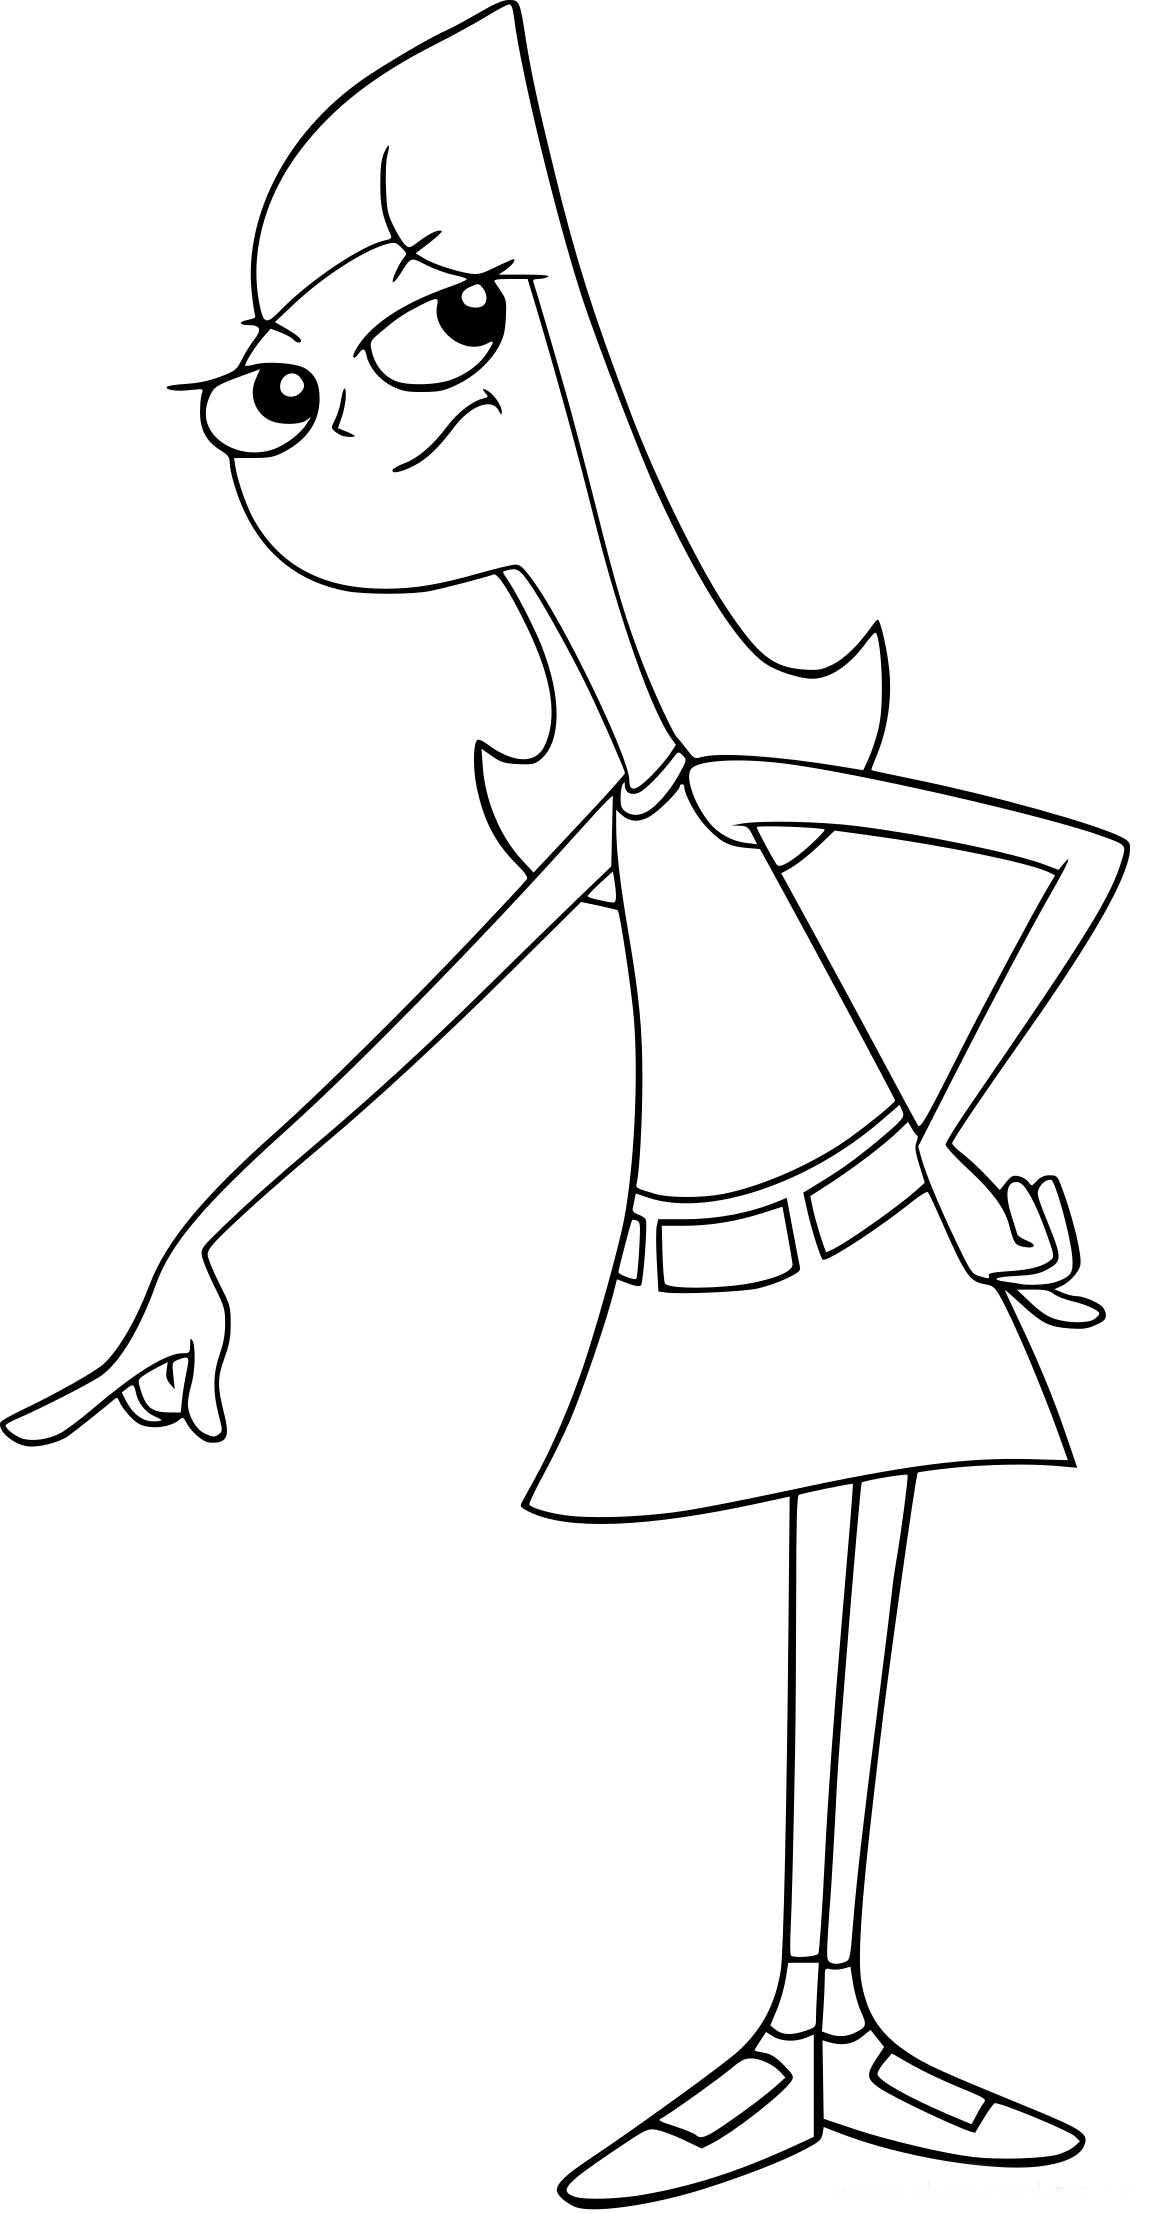 candace from phineas and ferb coloring pages